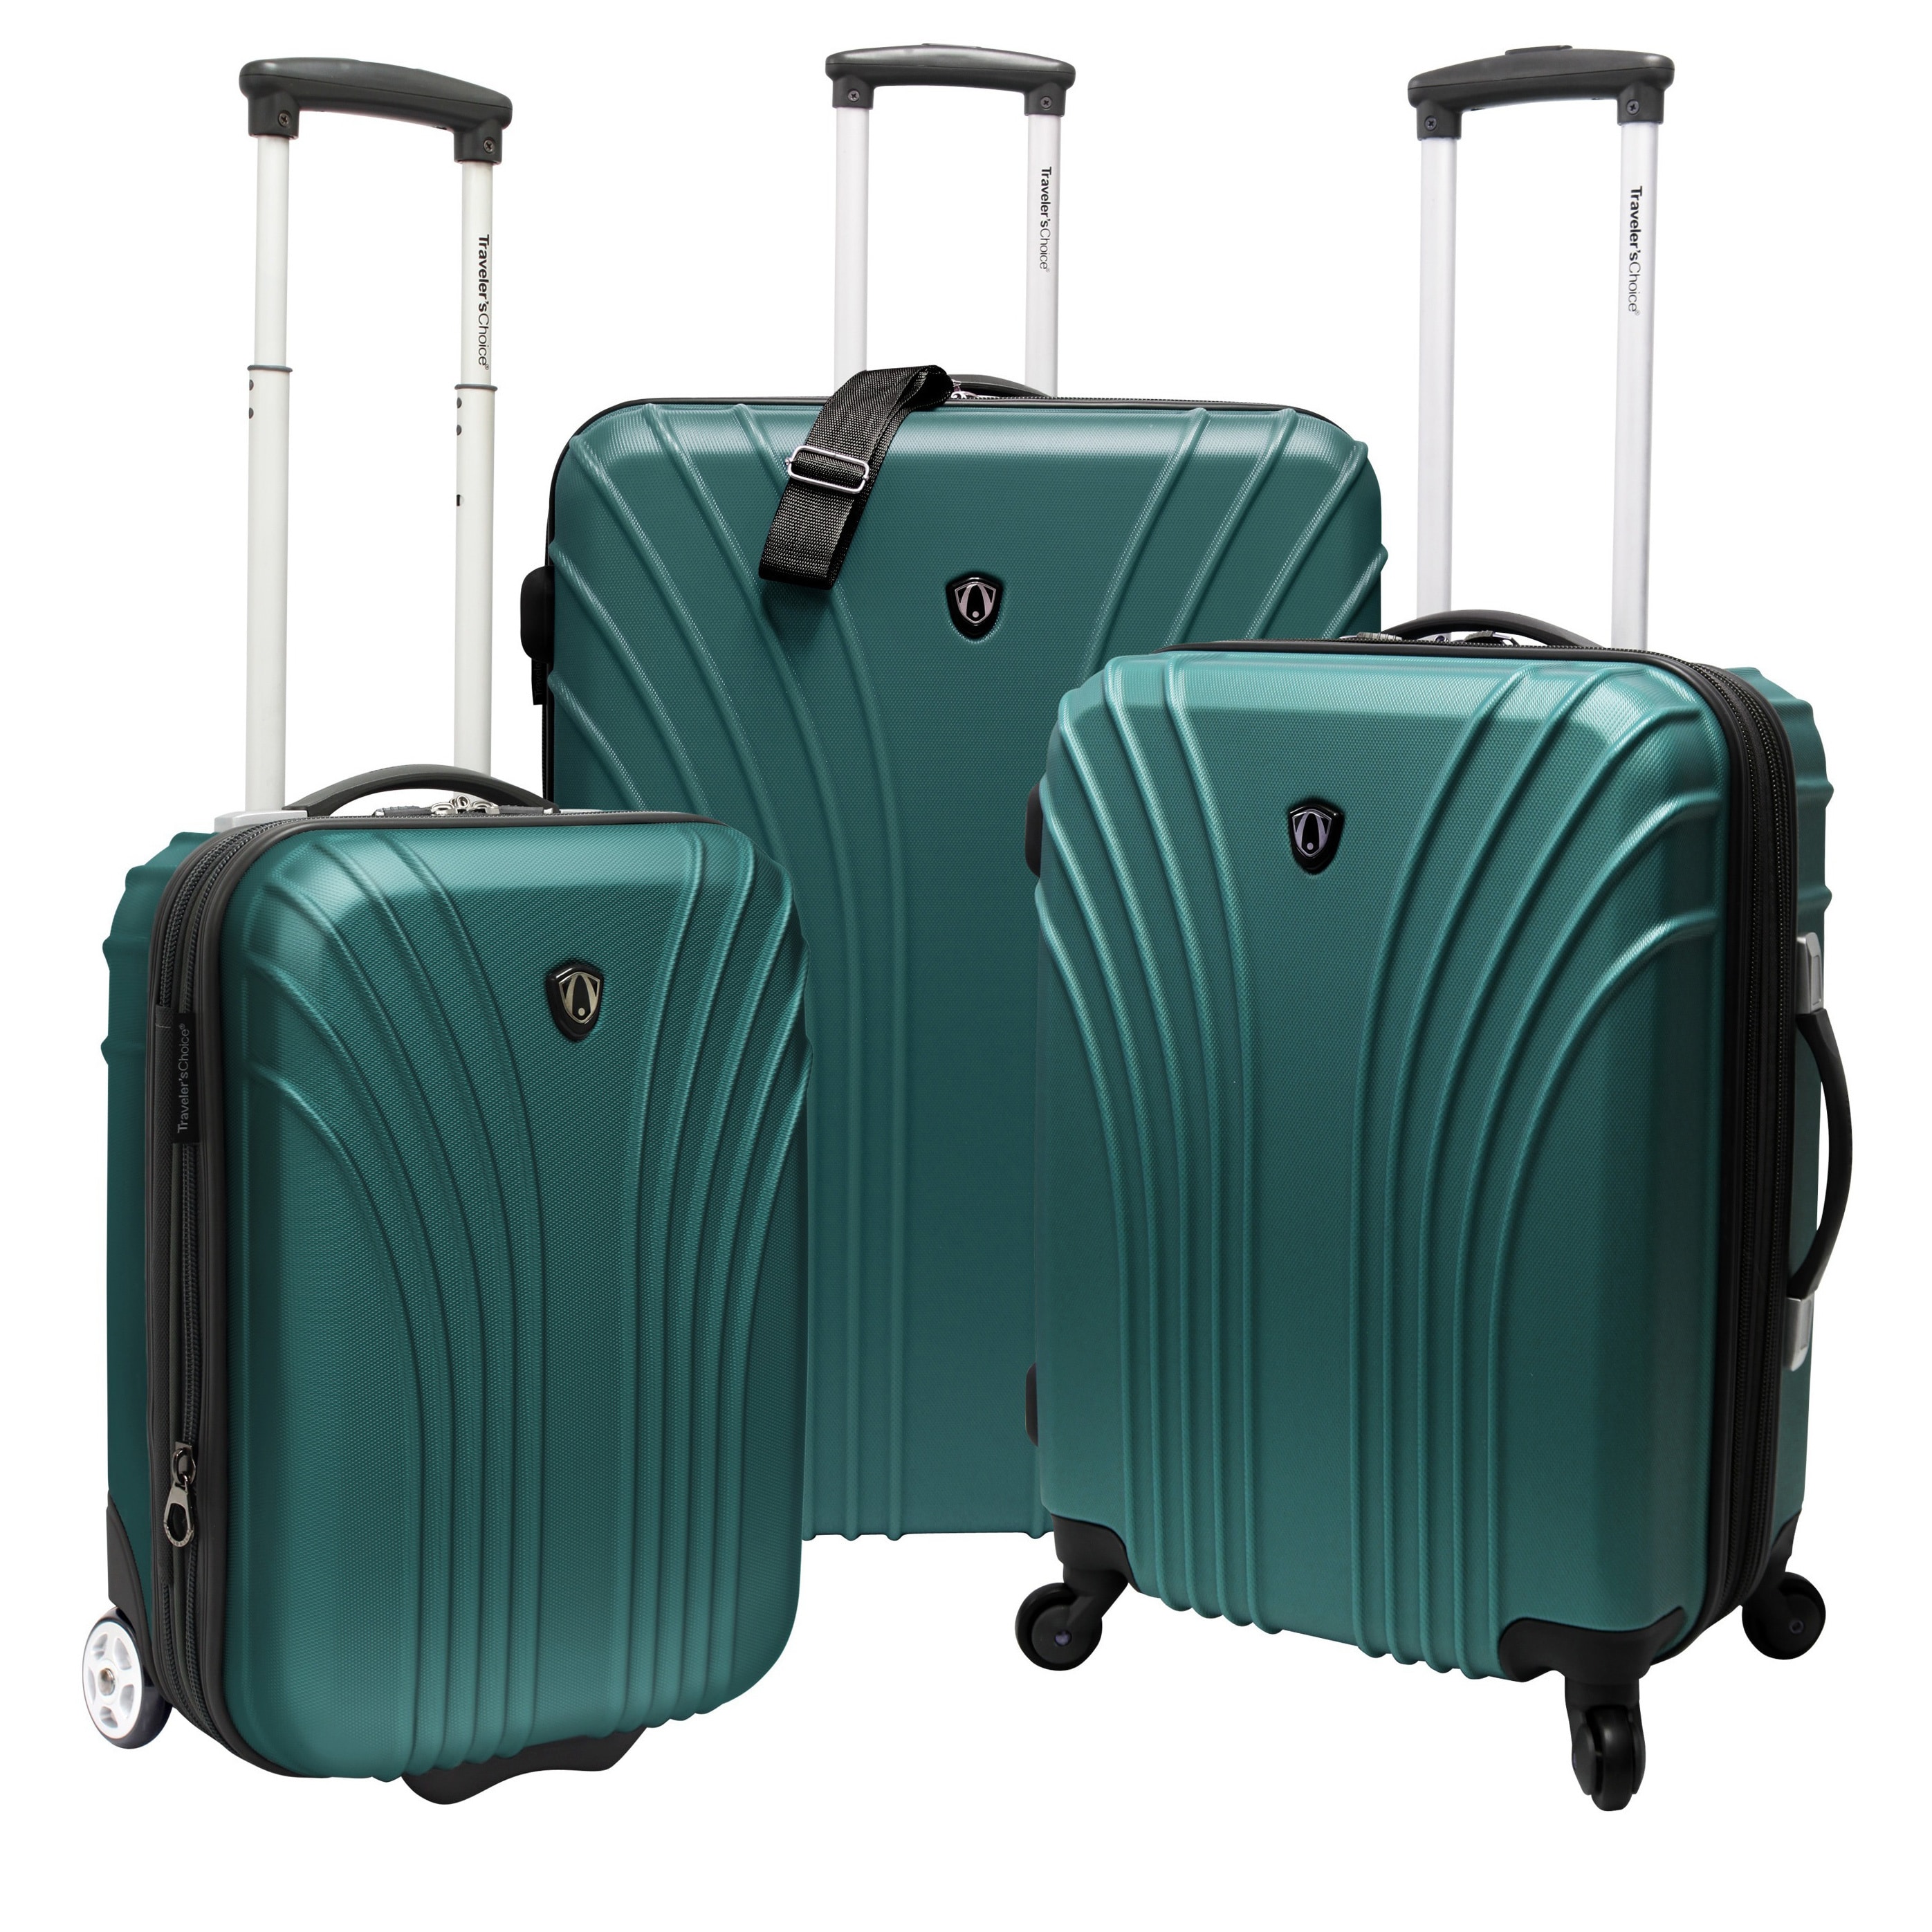  inch Hardside Luggage Set Today $154.99 4.3 (7 reviews)